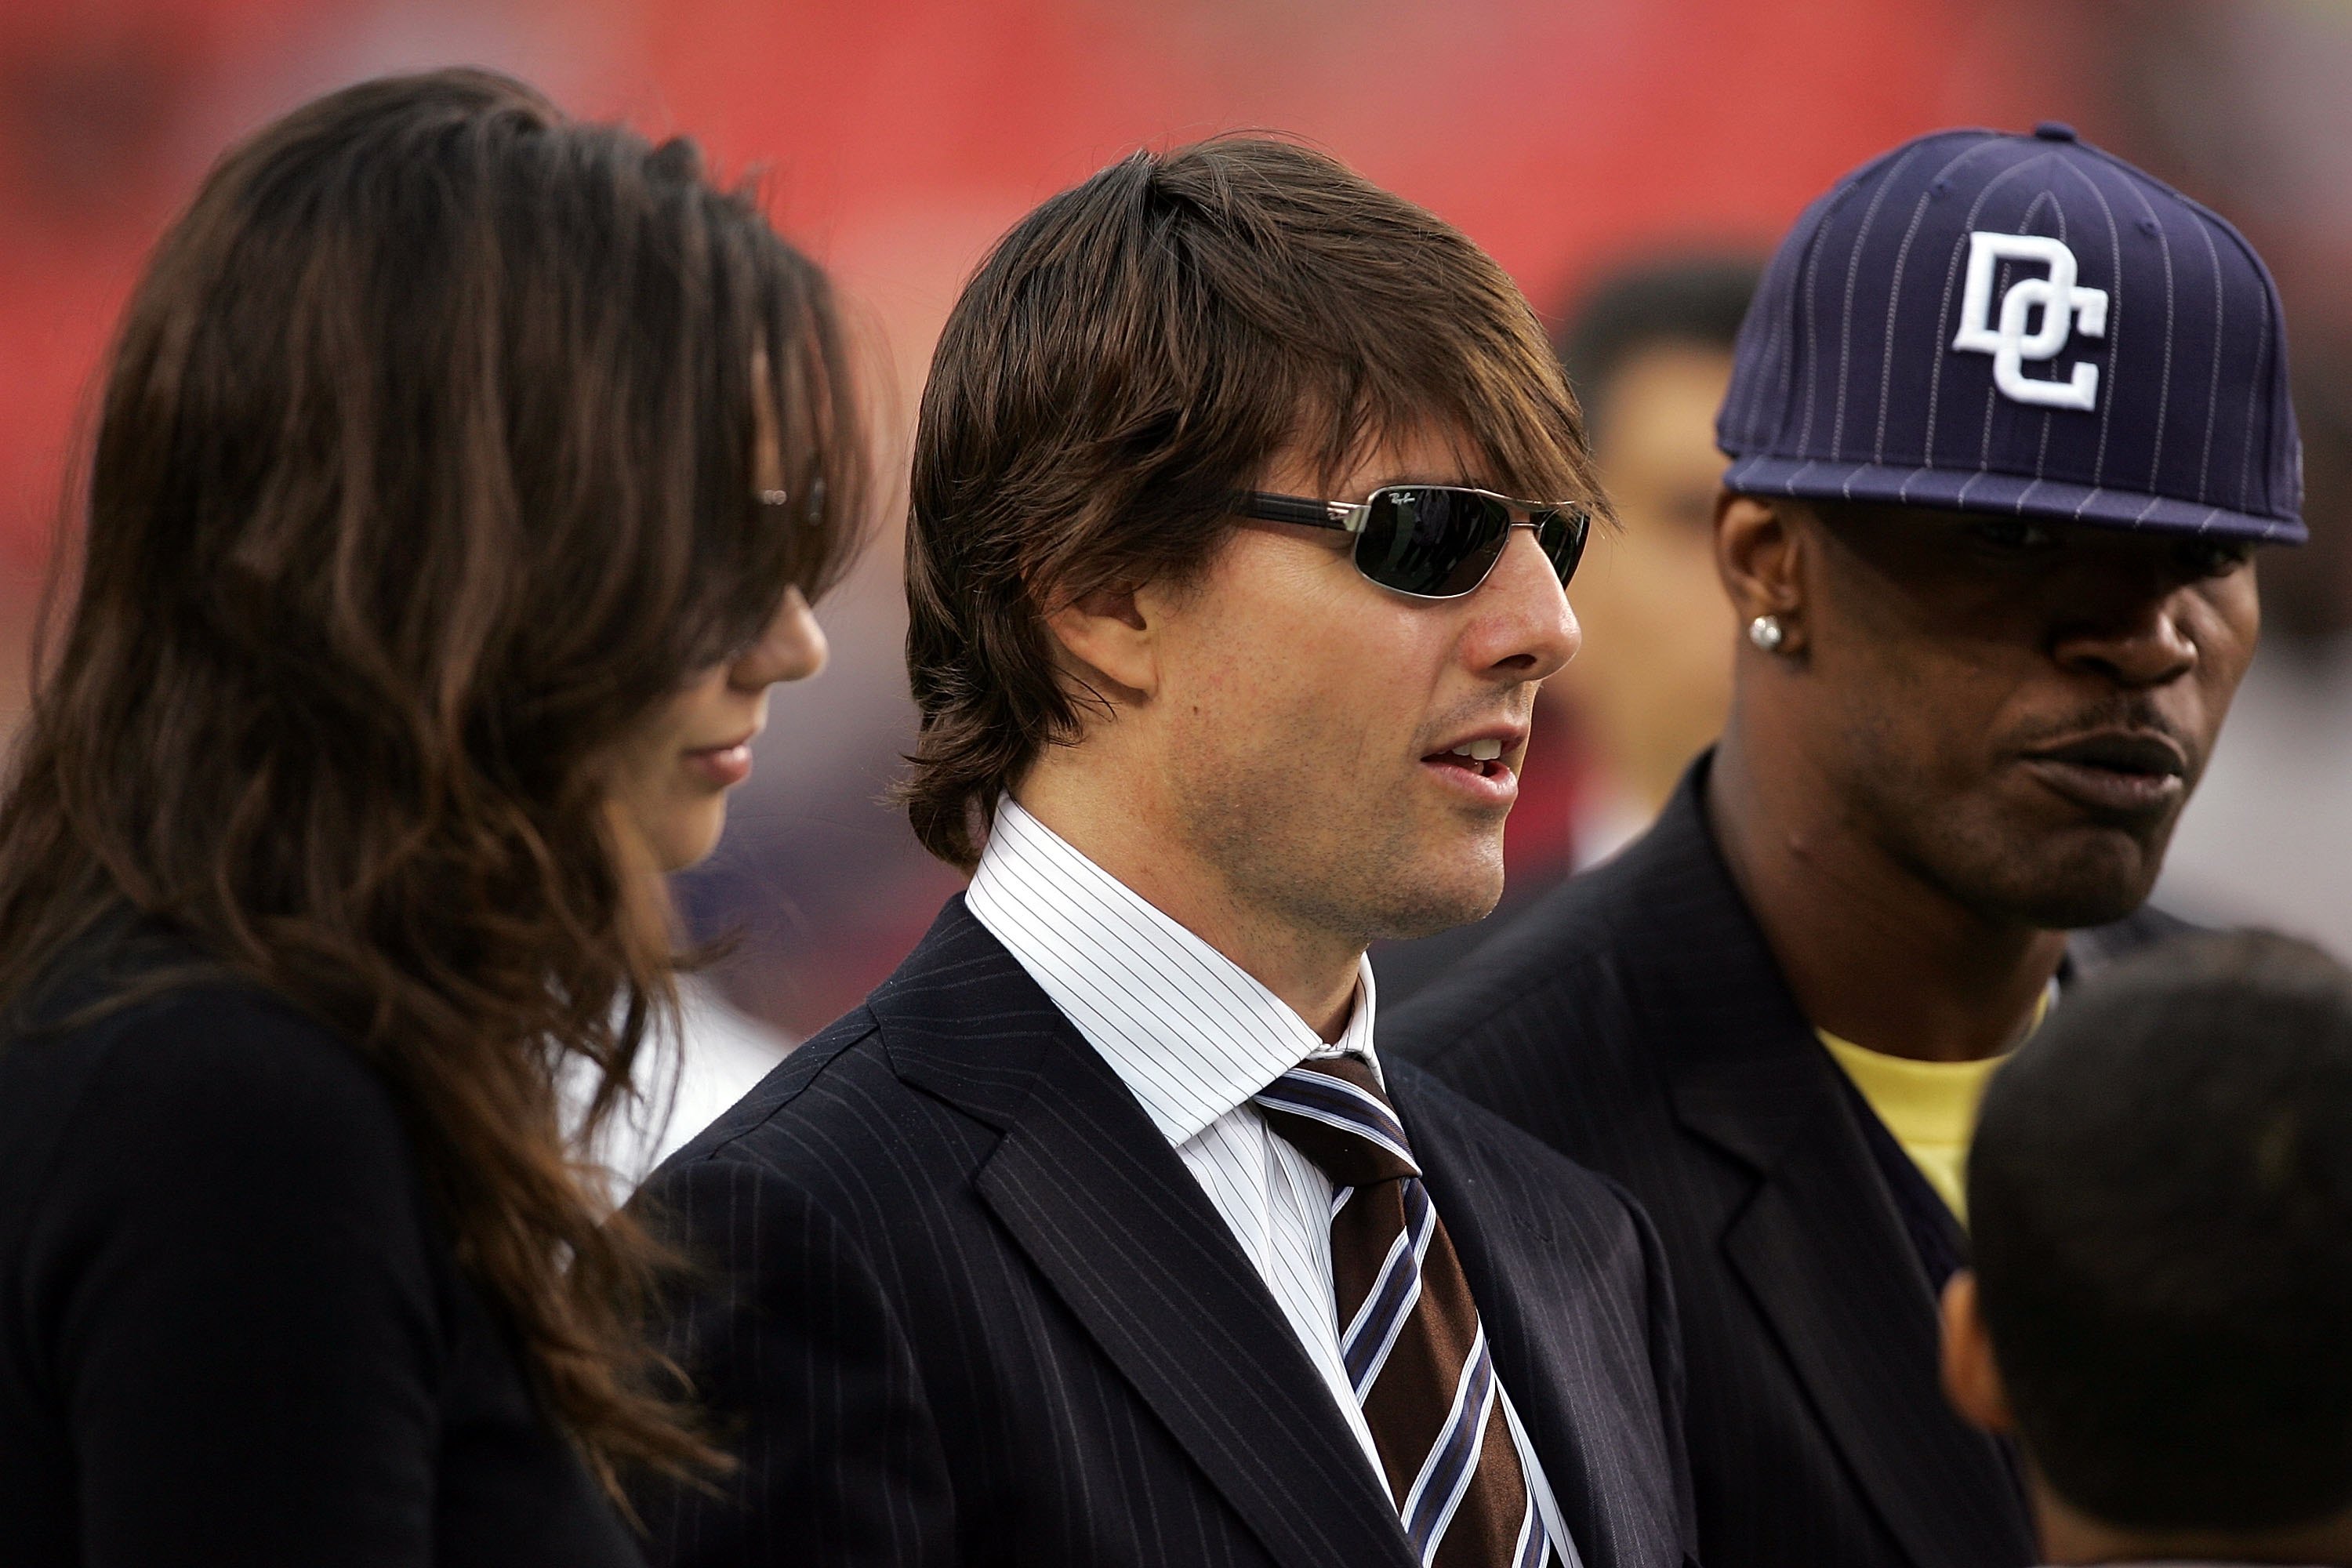 Katie Holmes, Tom Cruise, and Jamie Foxx at a Minnesota Vikings vs Washington Redskins game in Landover, 2006 | Source: Getty Images